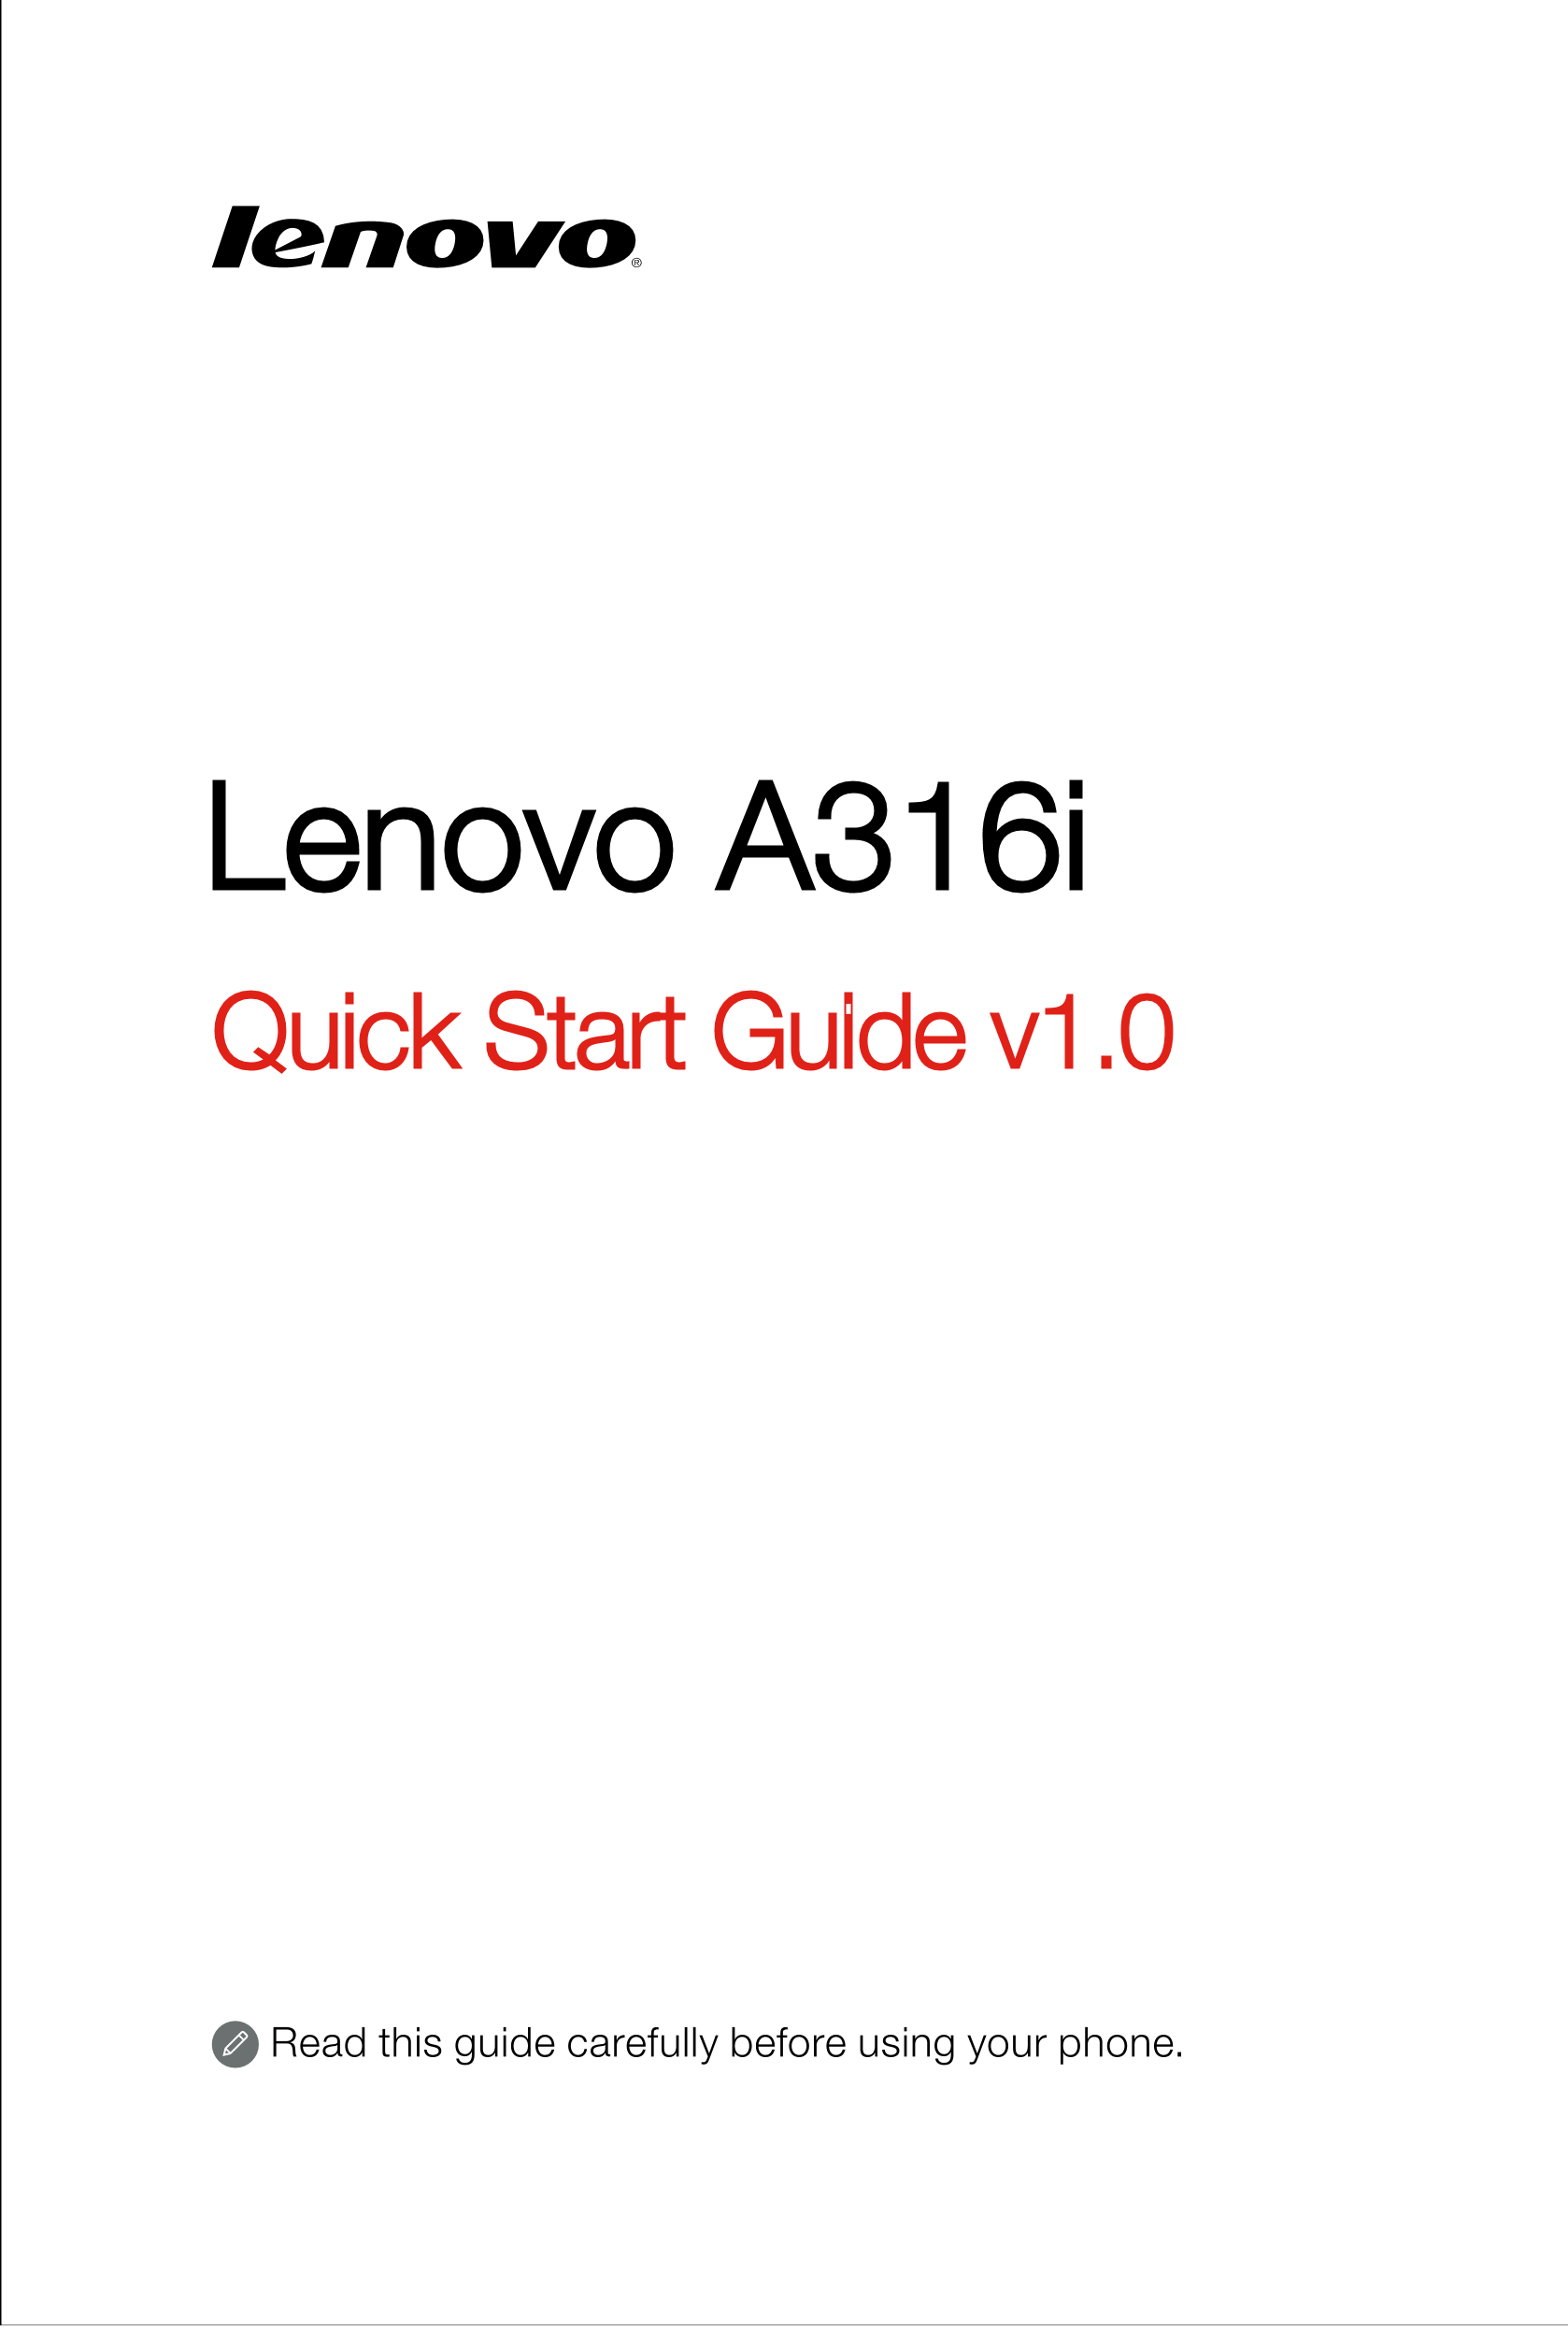 Lenovo A316i
Quick Start Guide v1.0
Read this guide carefully before using your phone. 